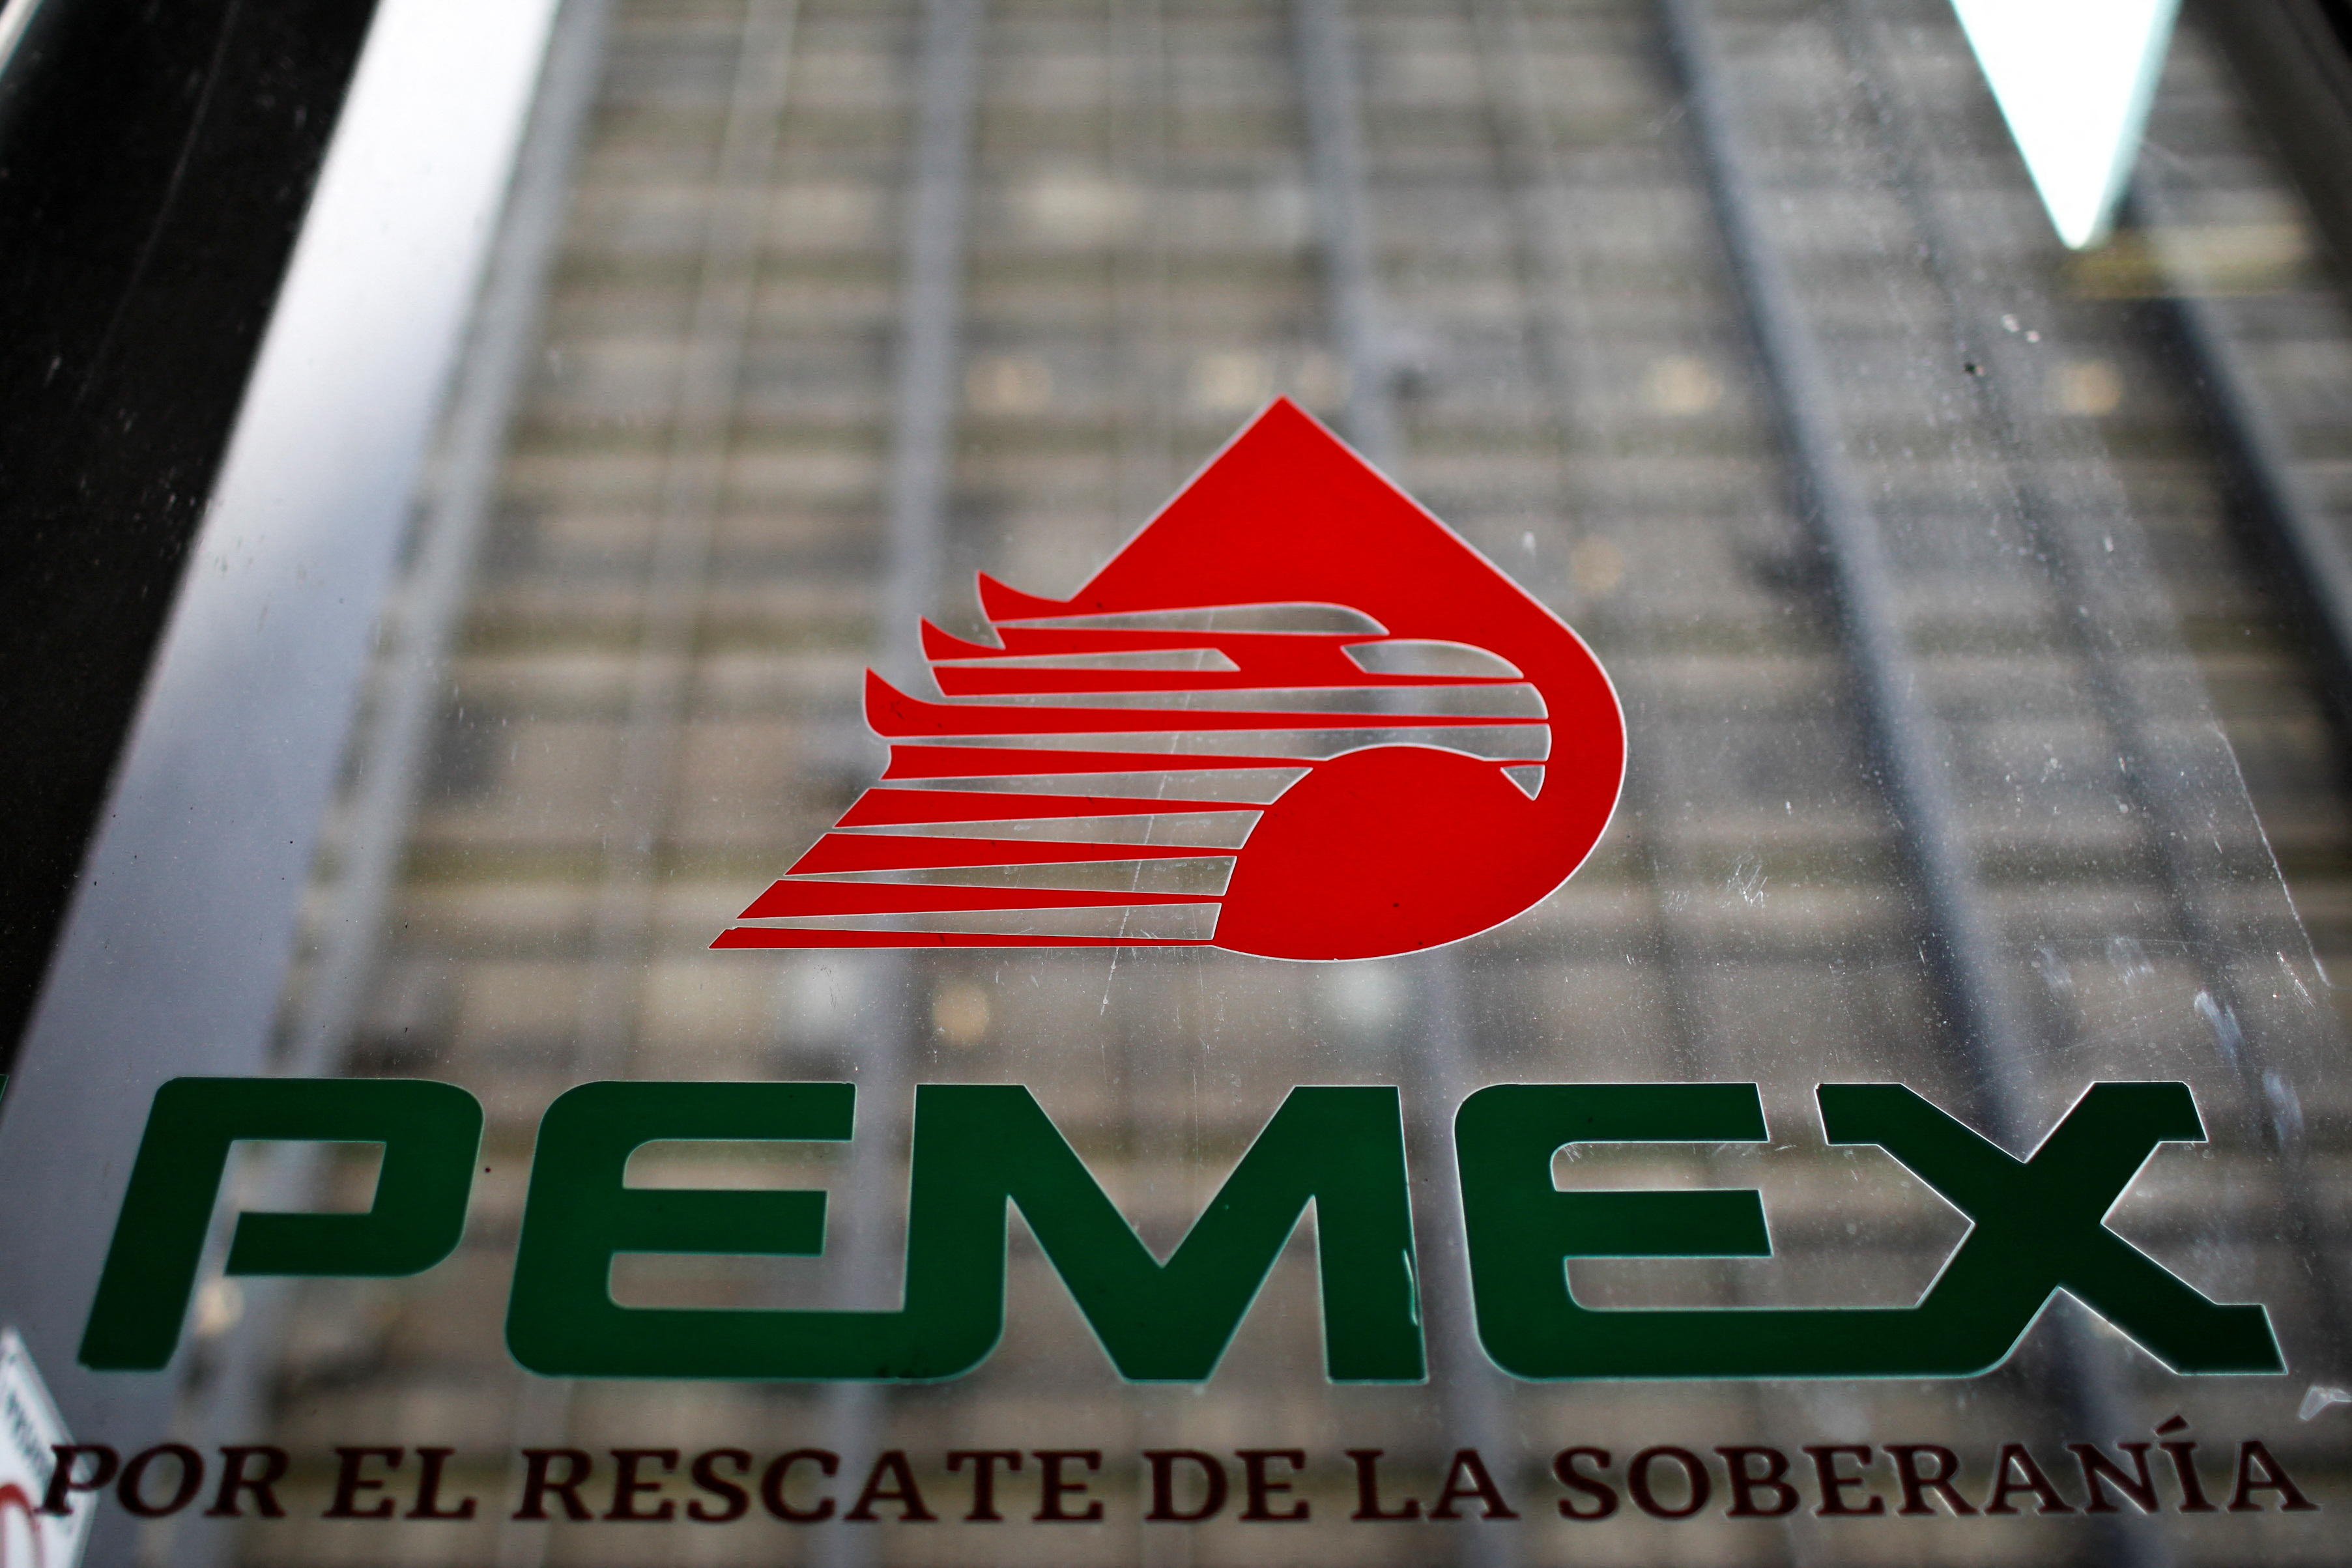 The logo of Petroleos Mexicanos (Pemex) is pictured at the company's headquarters in Mexico City